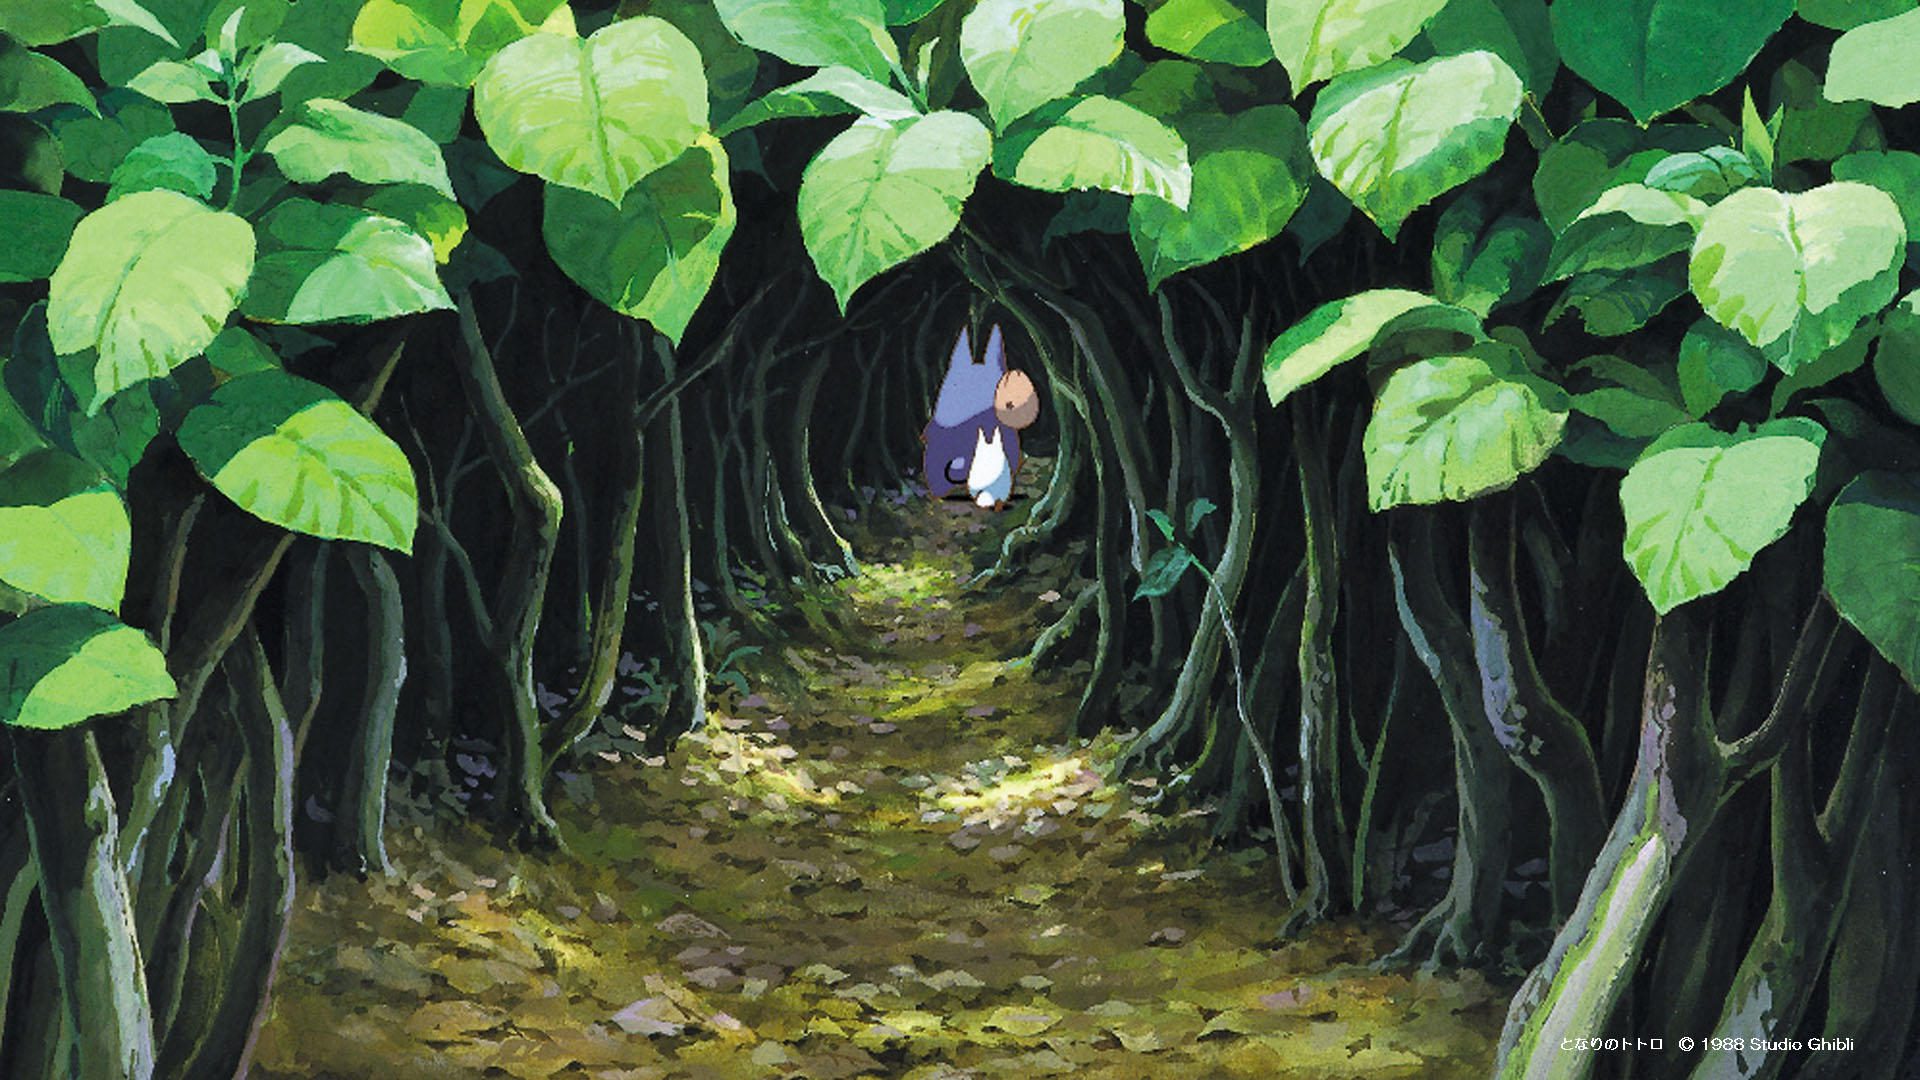 Studio Ghibli Released Some Awesome Backgrounds for Teleconferencing